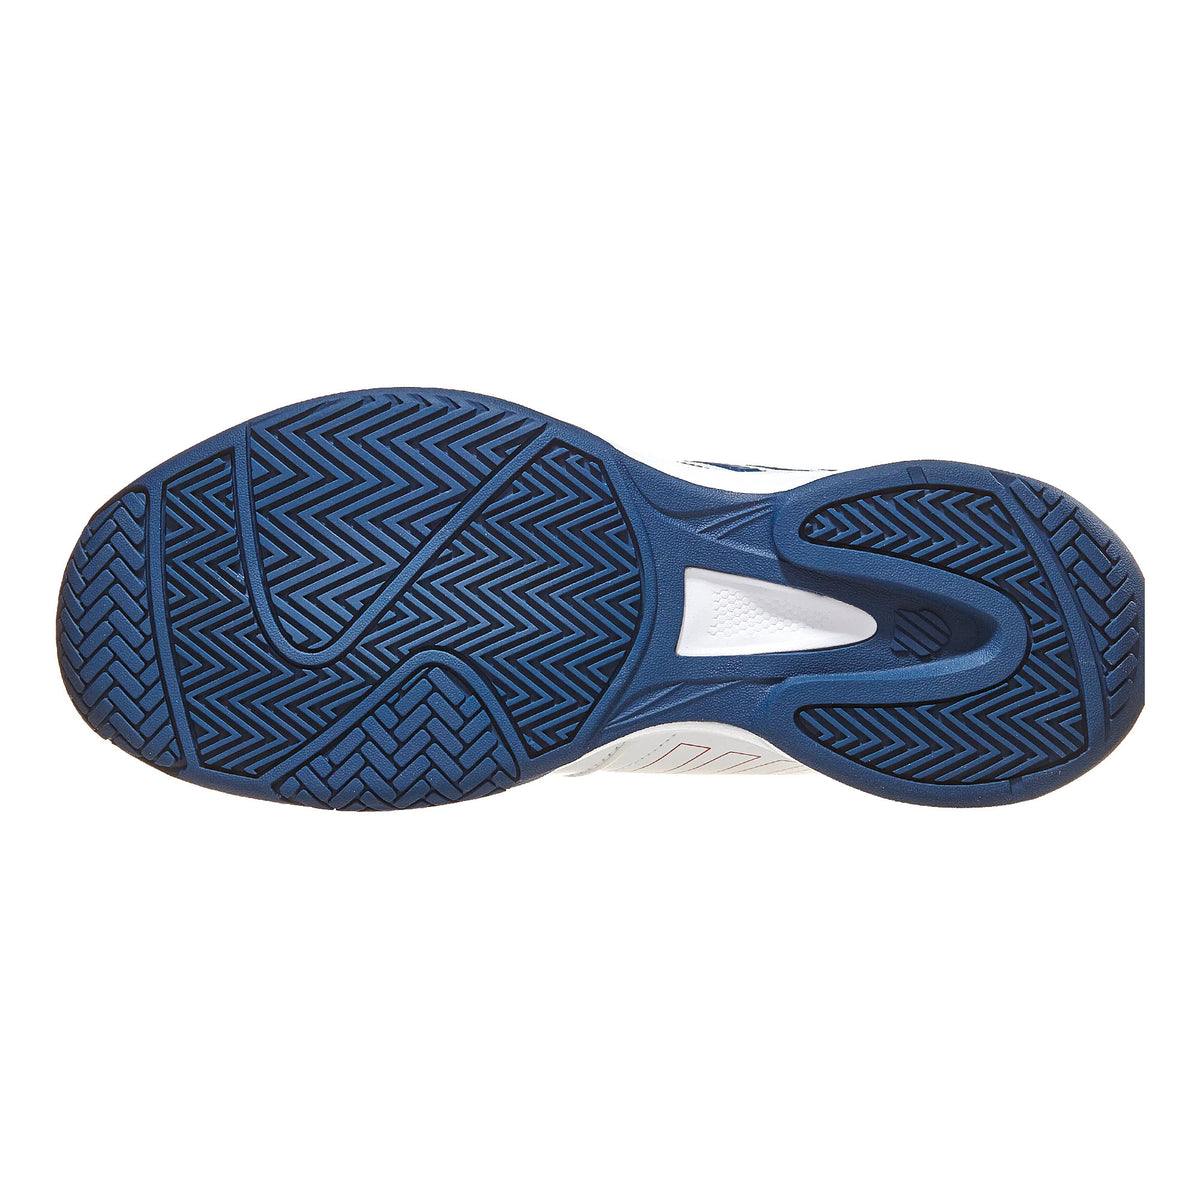 Bottom view of a pair of K-Swiss Court Express White/Blue - Mens tennis shoes showing the geometric pattern on the soles.